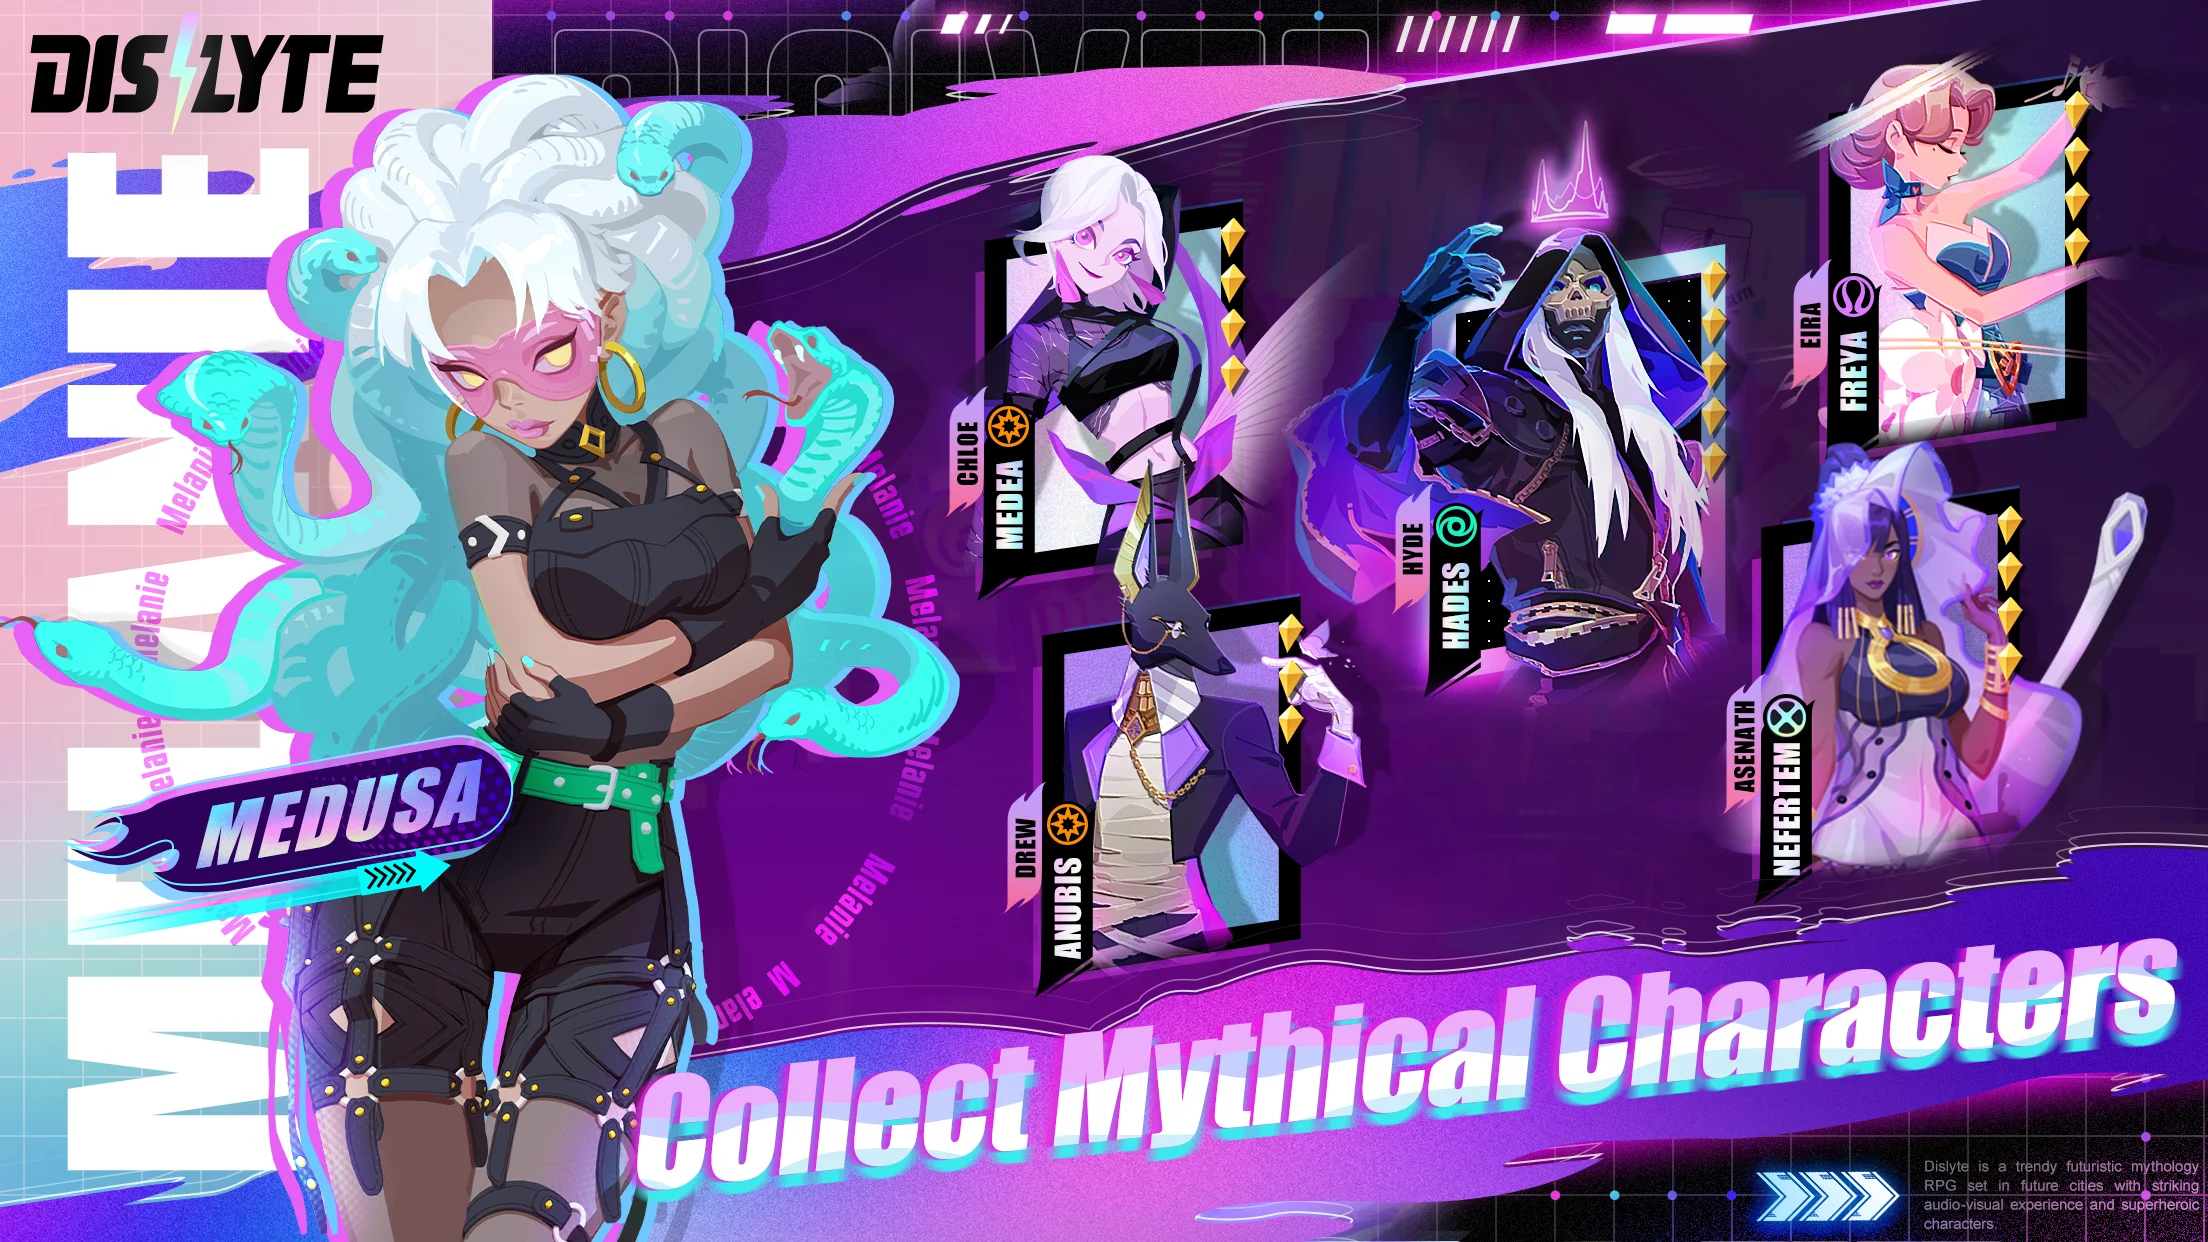 collect mythical characters